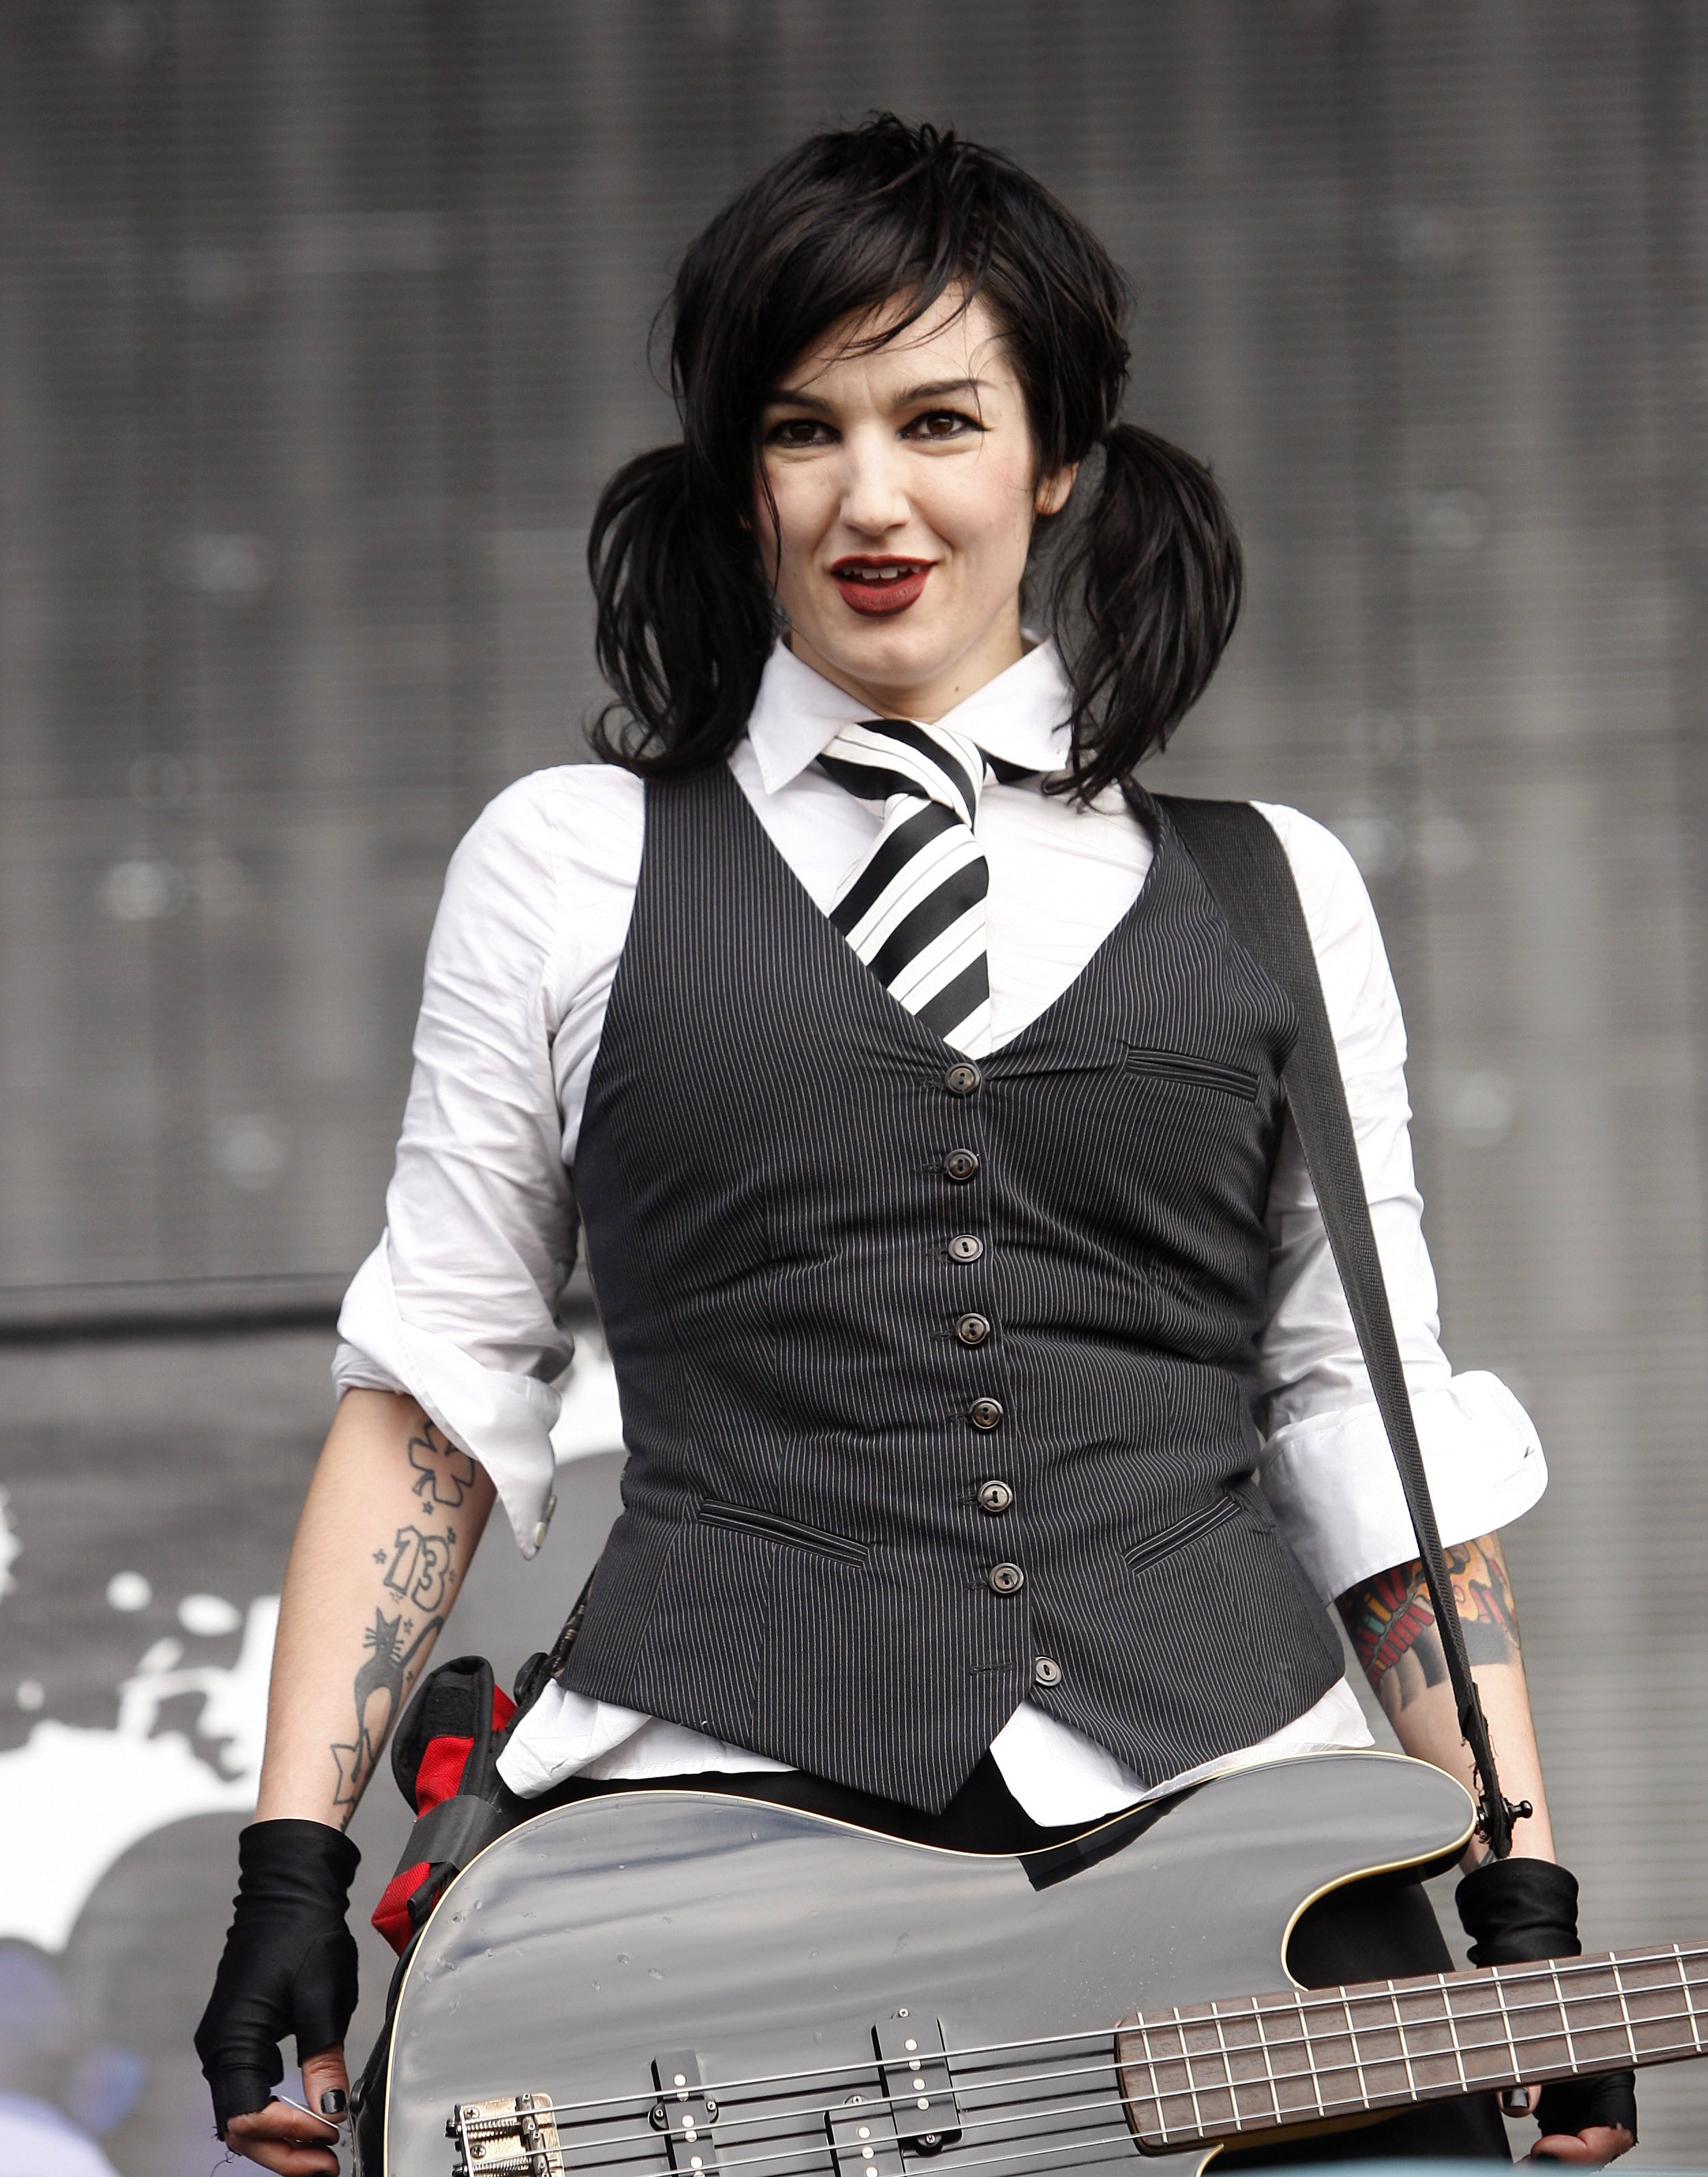 Lyn-Z of Mindless Self Indulgence at the Reading Festival in 2008 in Reading, England. | Source: Getty Images